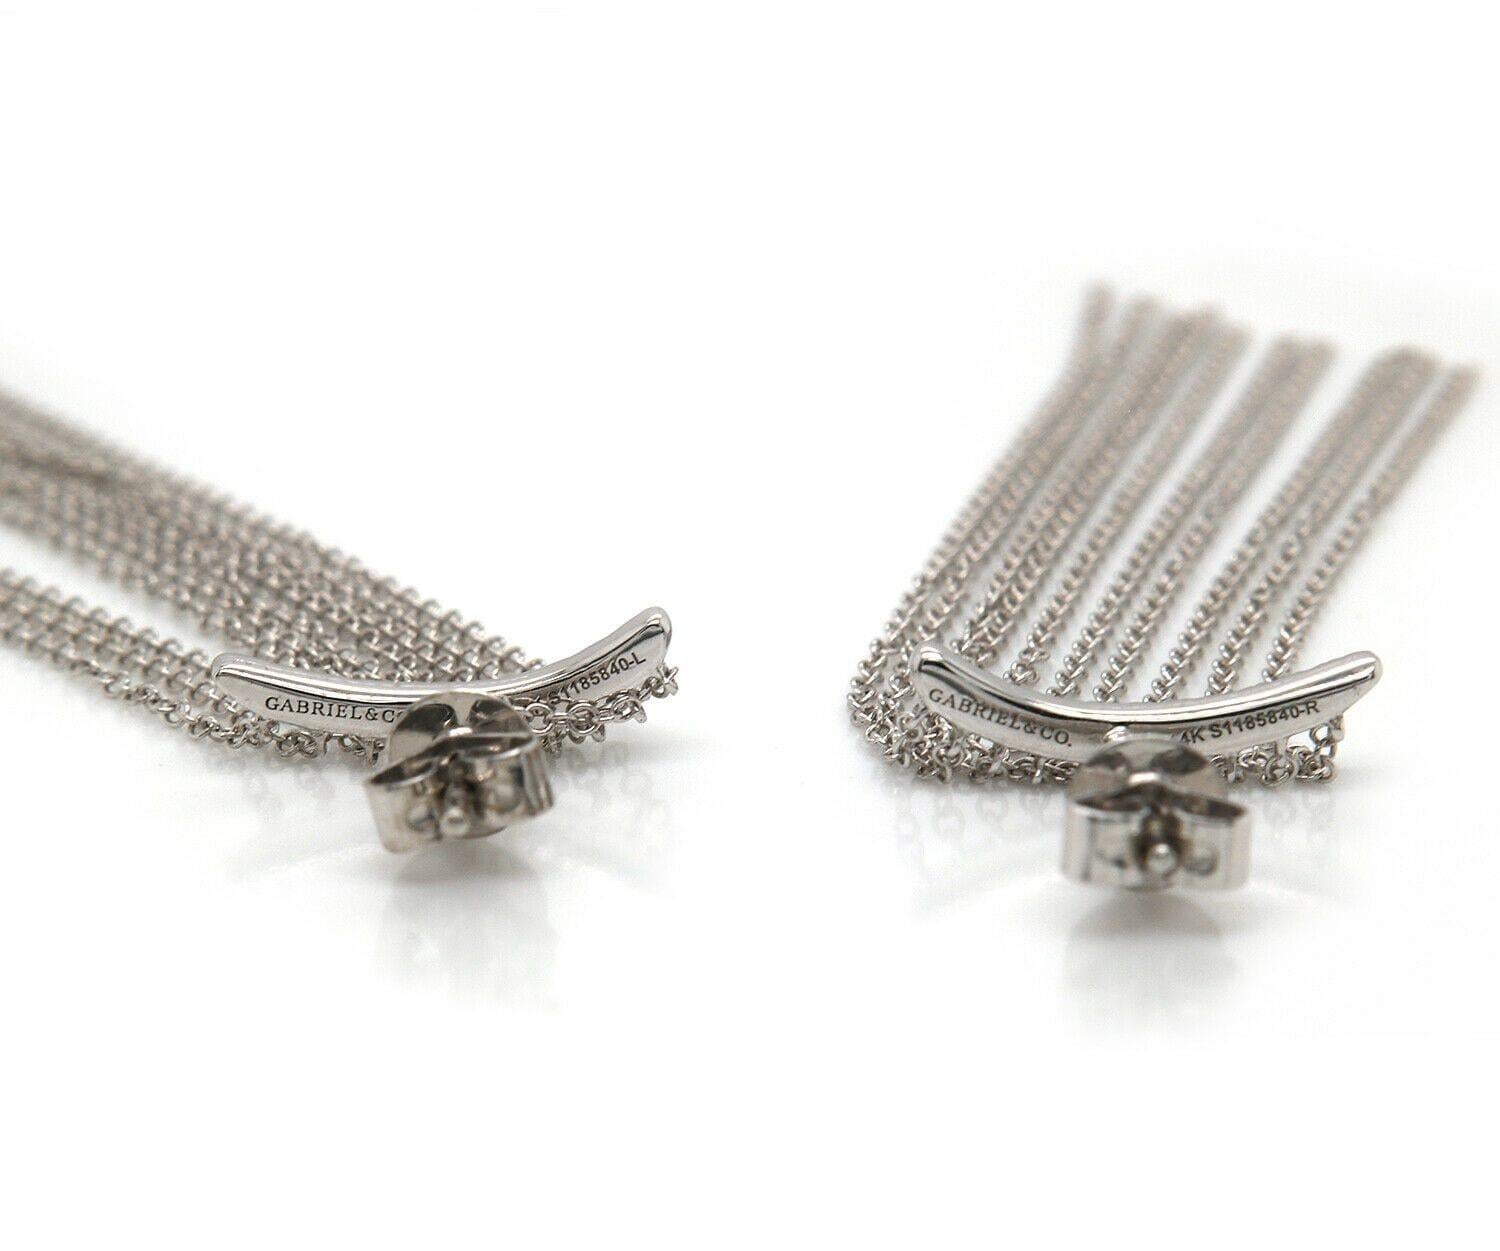 New Gabriel & Co. 0.21ctw Diamond Curved Bar Tassel Earrings in 14K White Gold In New Condition For Sale In Vienna, VA